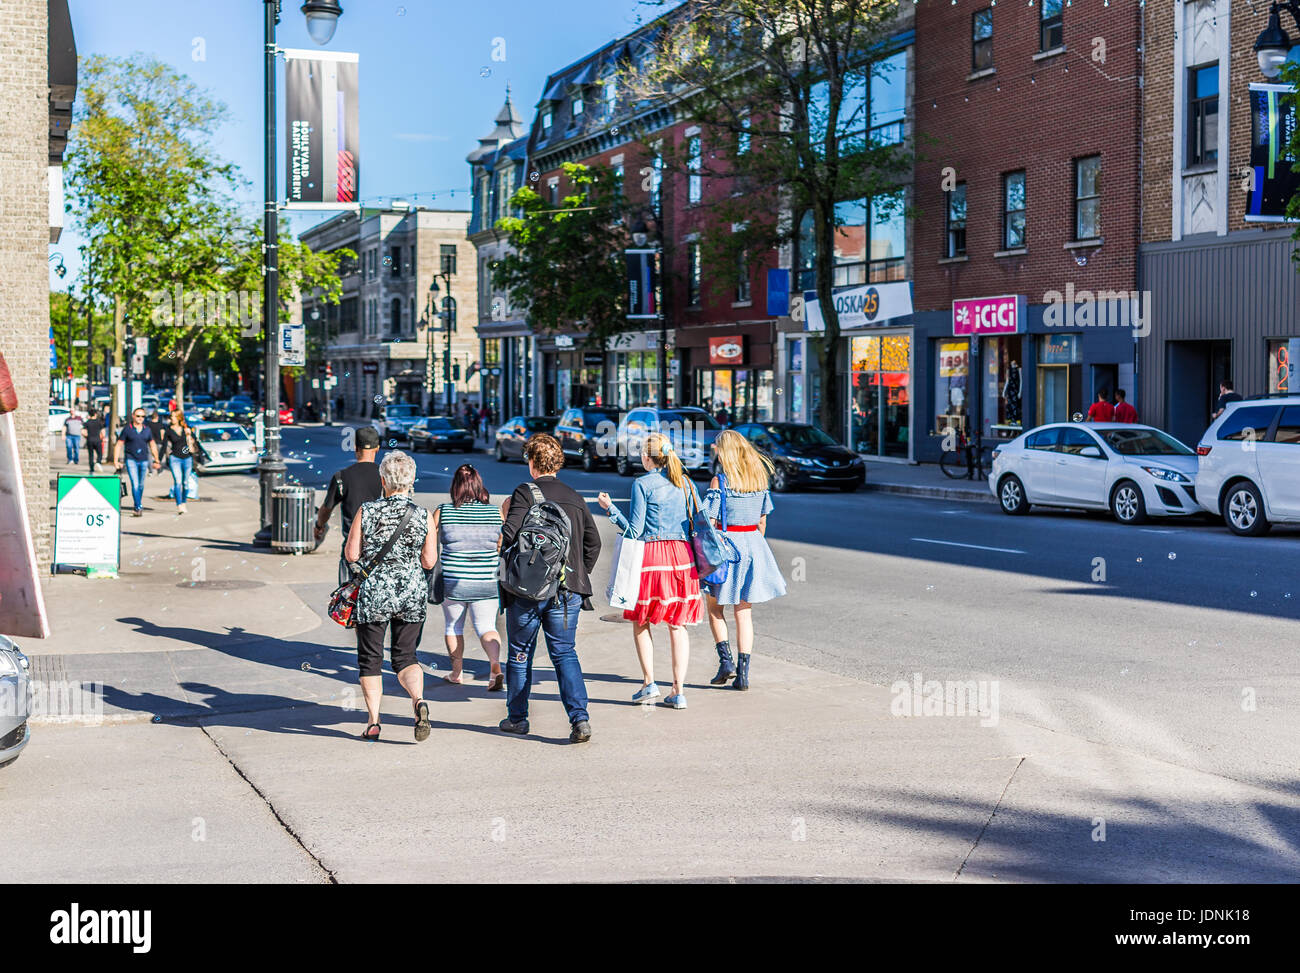 Montreal, Canada - May 27, 2017: People walking on Saint Laurent boulevard in Montreal's Plateau Mont Royal in Quebec region Stock Photo